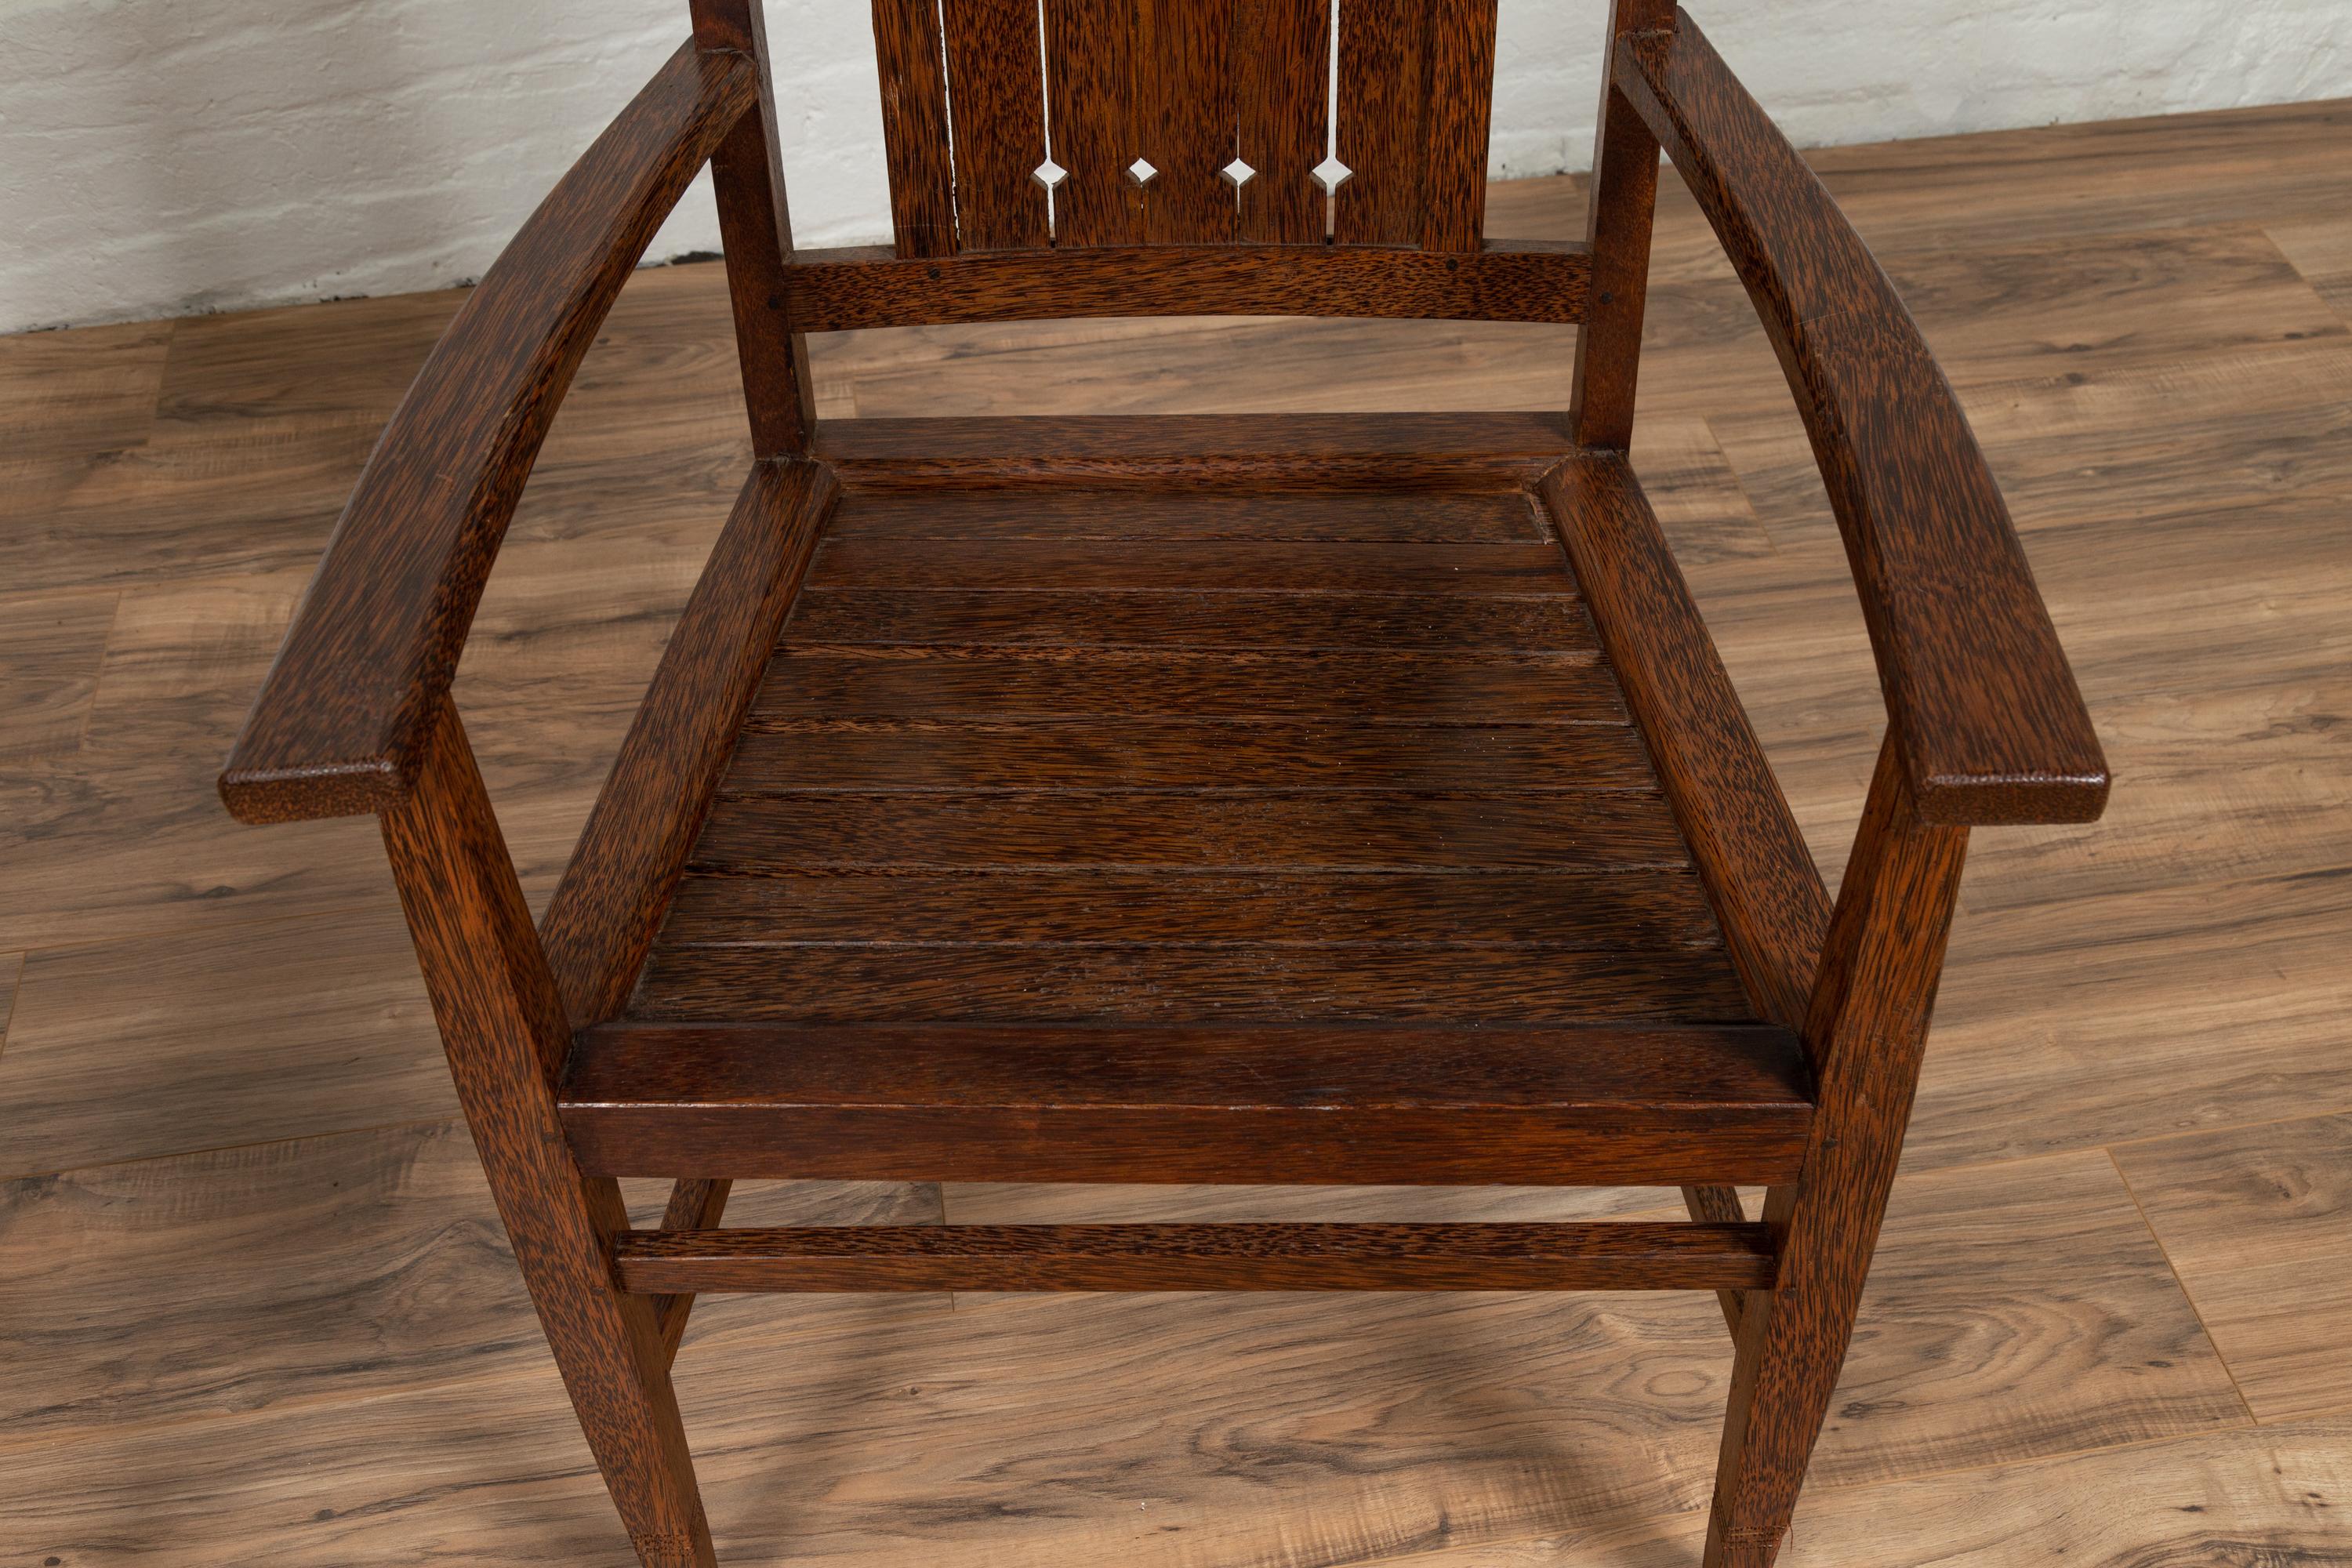 Vintage Dutch Colonial Armchair with Pierced Wooden Slats and Bonnet-Style Rail For Sale 4